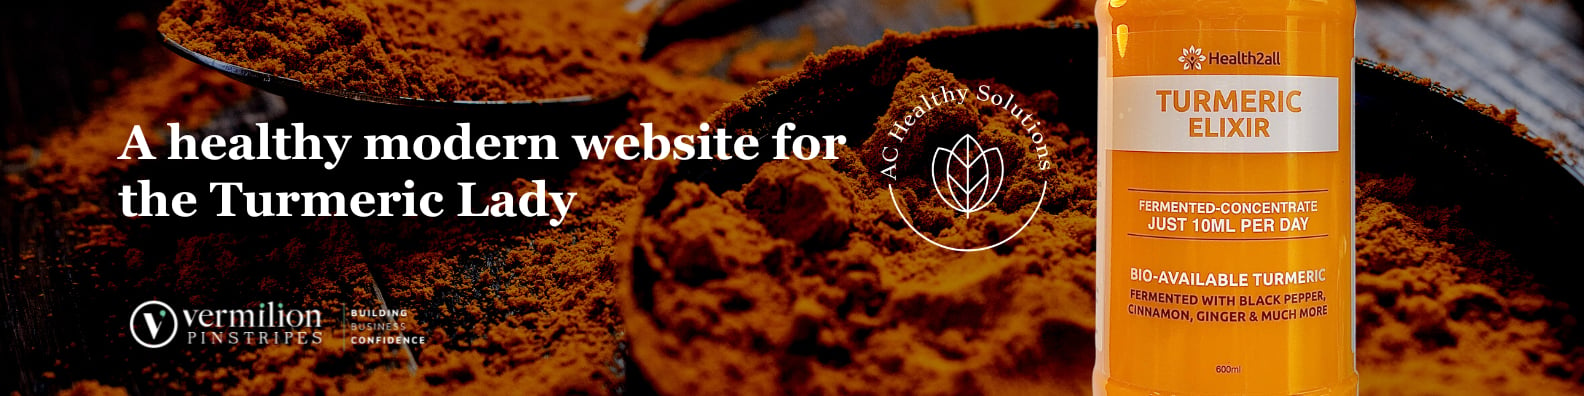 A healthy modern website for the Turmeric Lady, Alison Carroll at AC Healthy Solutions